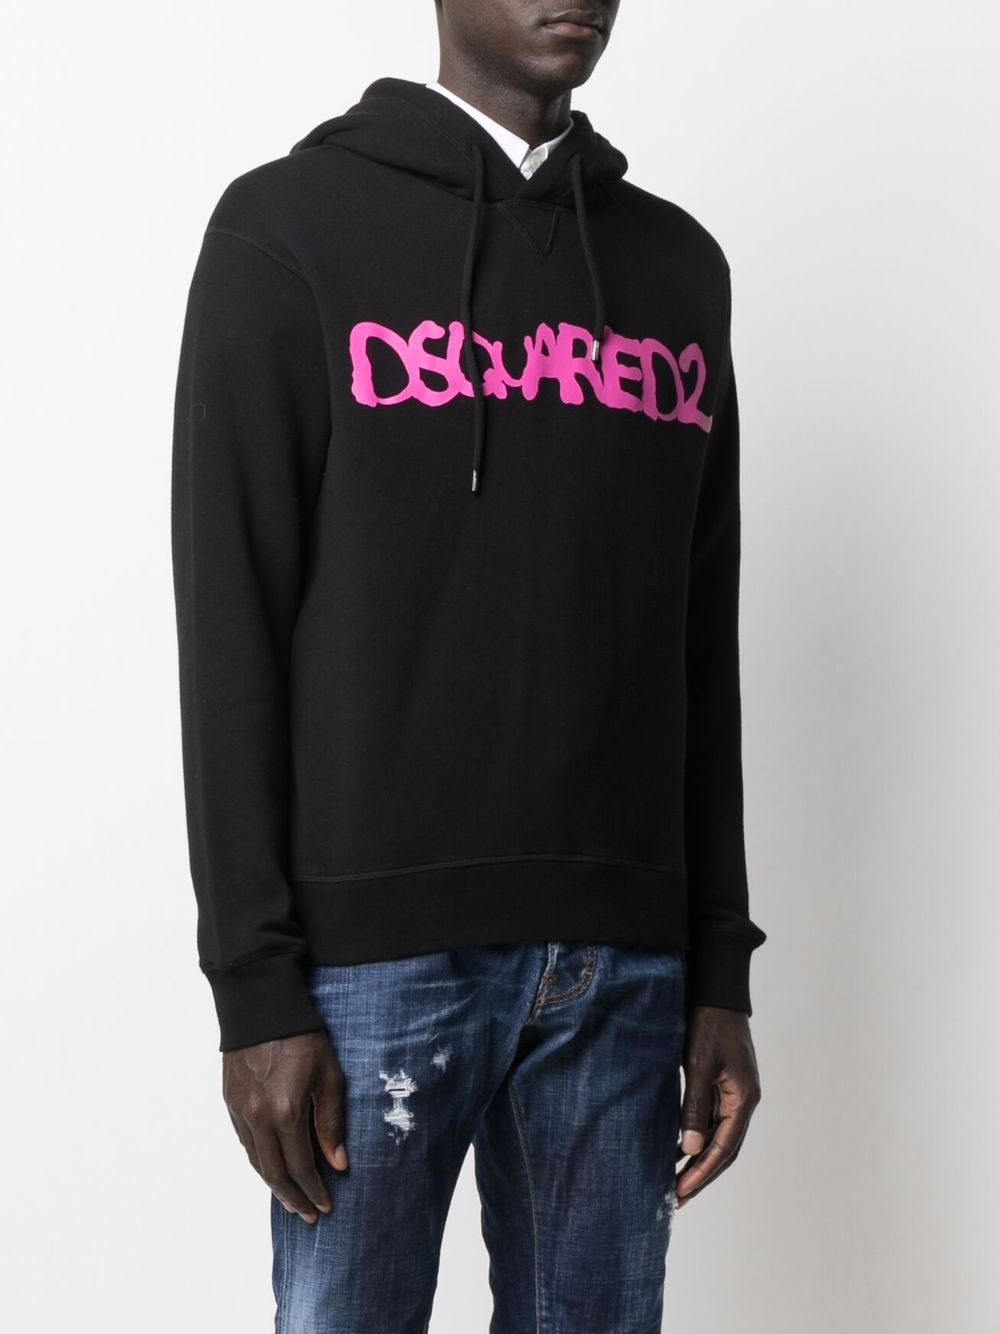 Dsquared2 Fluorescent Spray Hoodie in Black